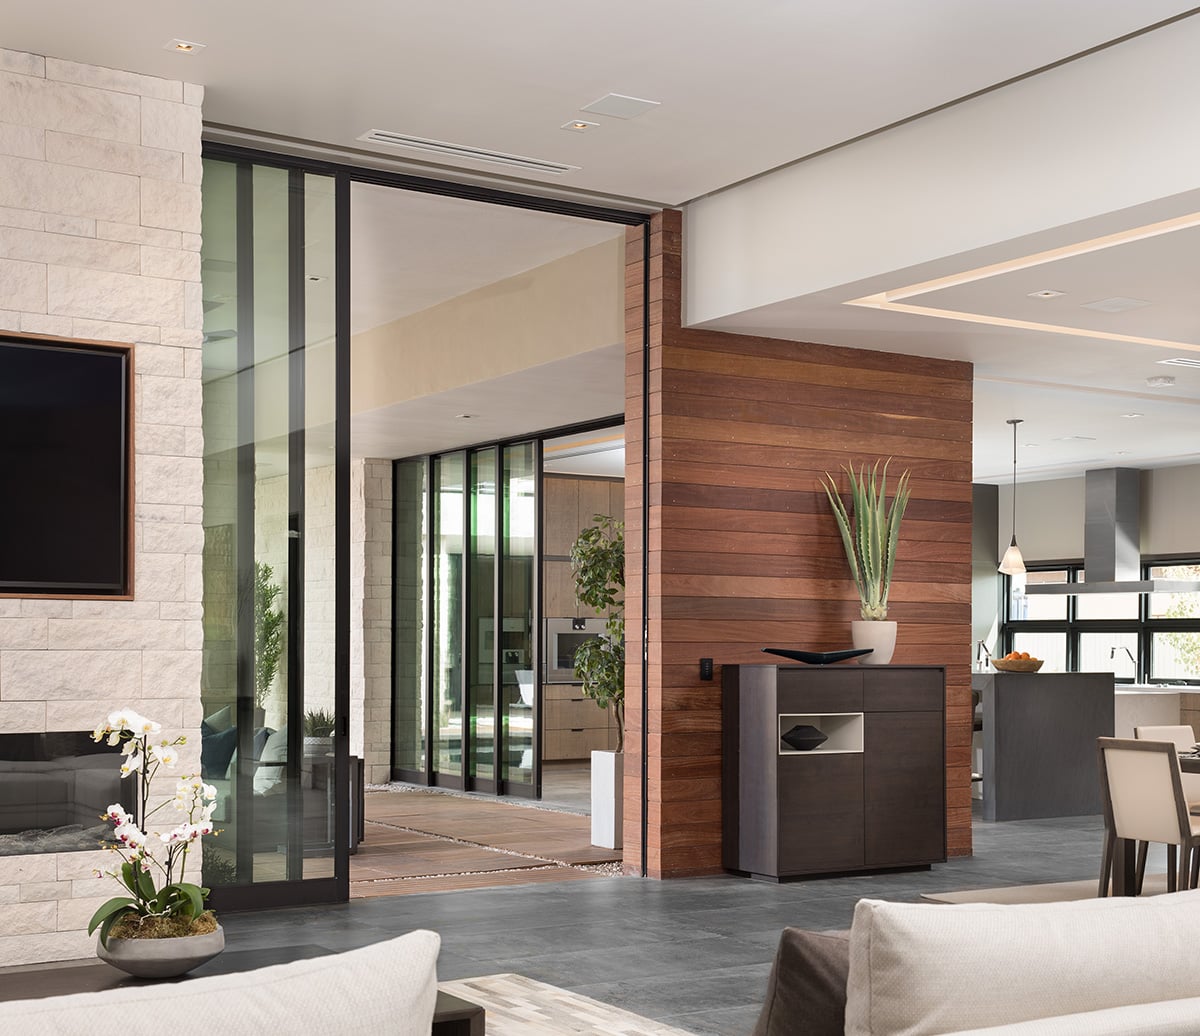 Thanks to Western Window Systems’ Series 900 Multi-Slide Door, the home’s indoor and outdoor living areas all convert into one seamless space.